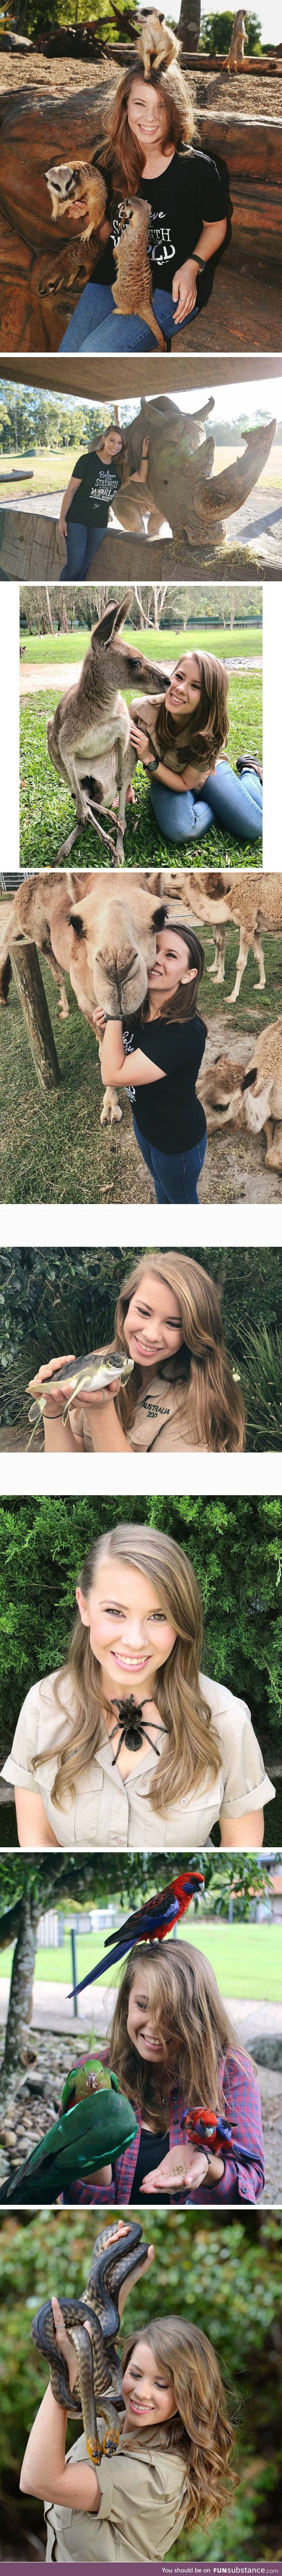 Bindi Irwin is following in her father's footsteps